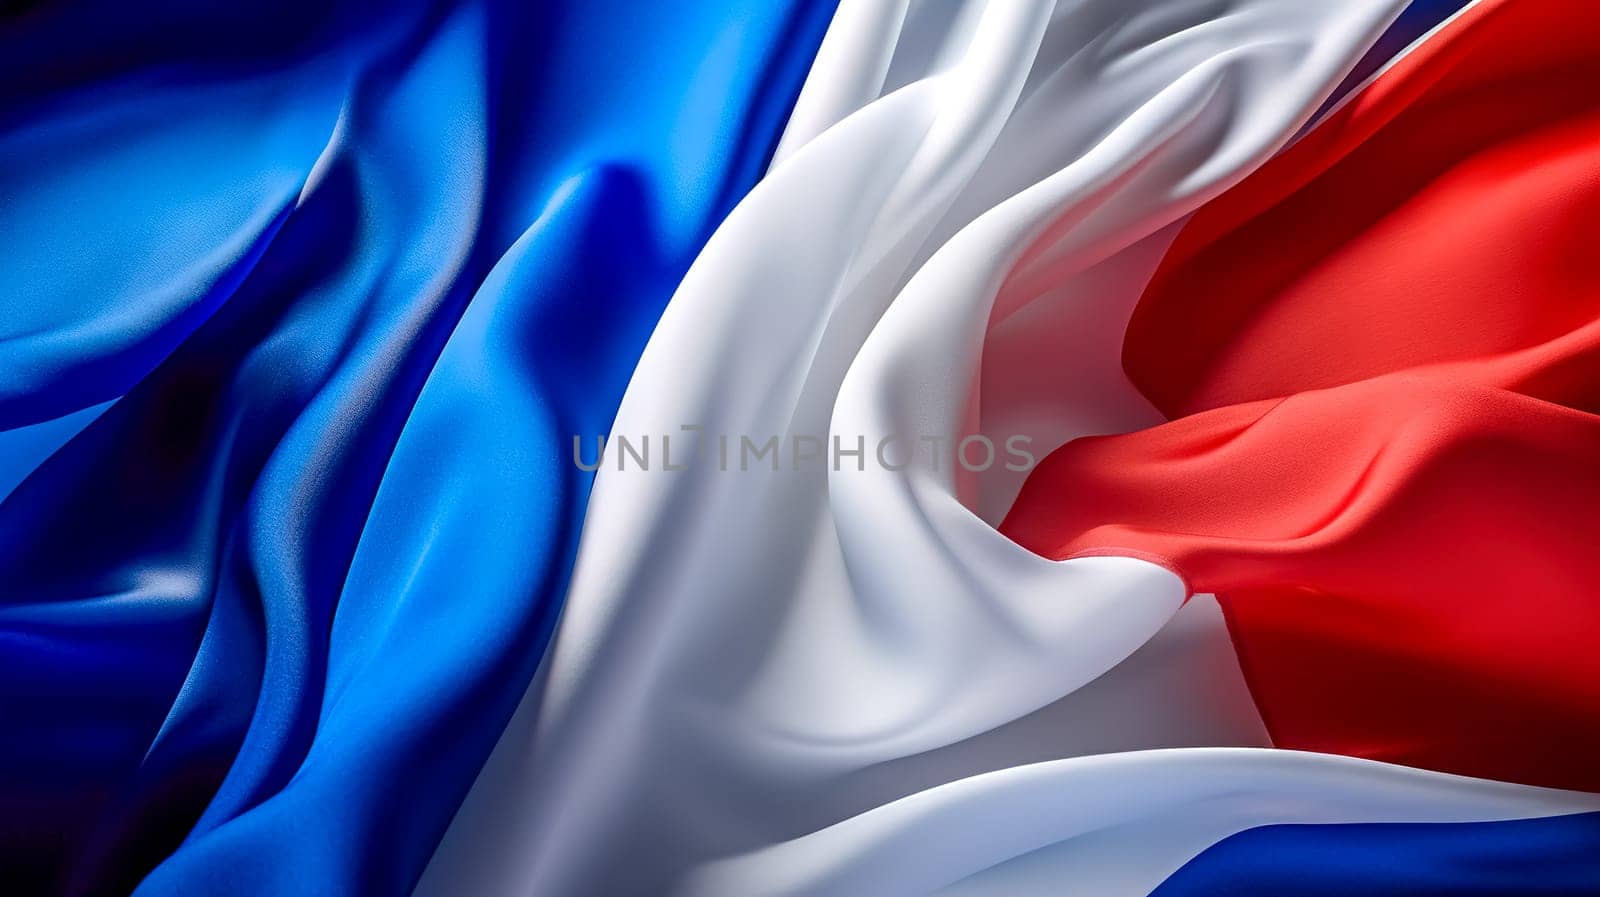 Elegant French flag rendered in satin with luxurious folds.